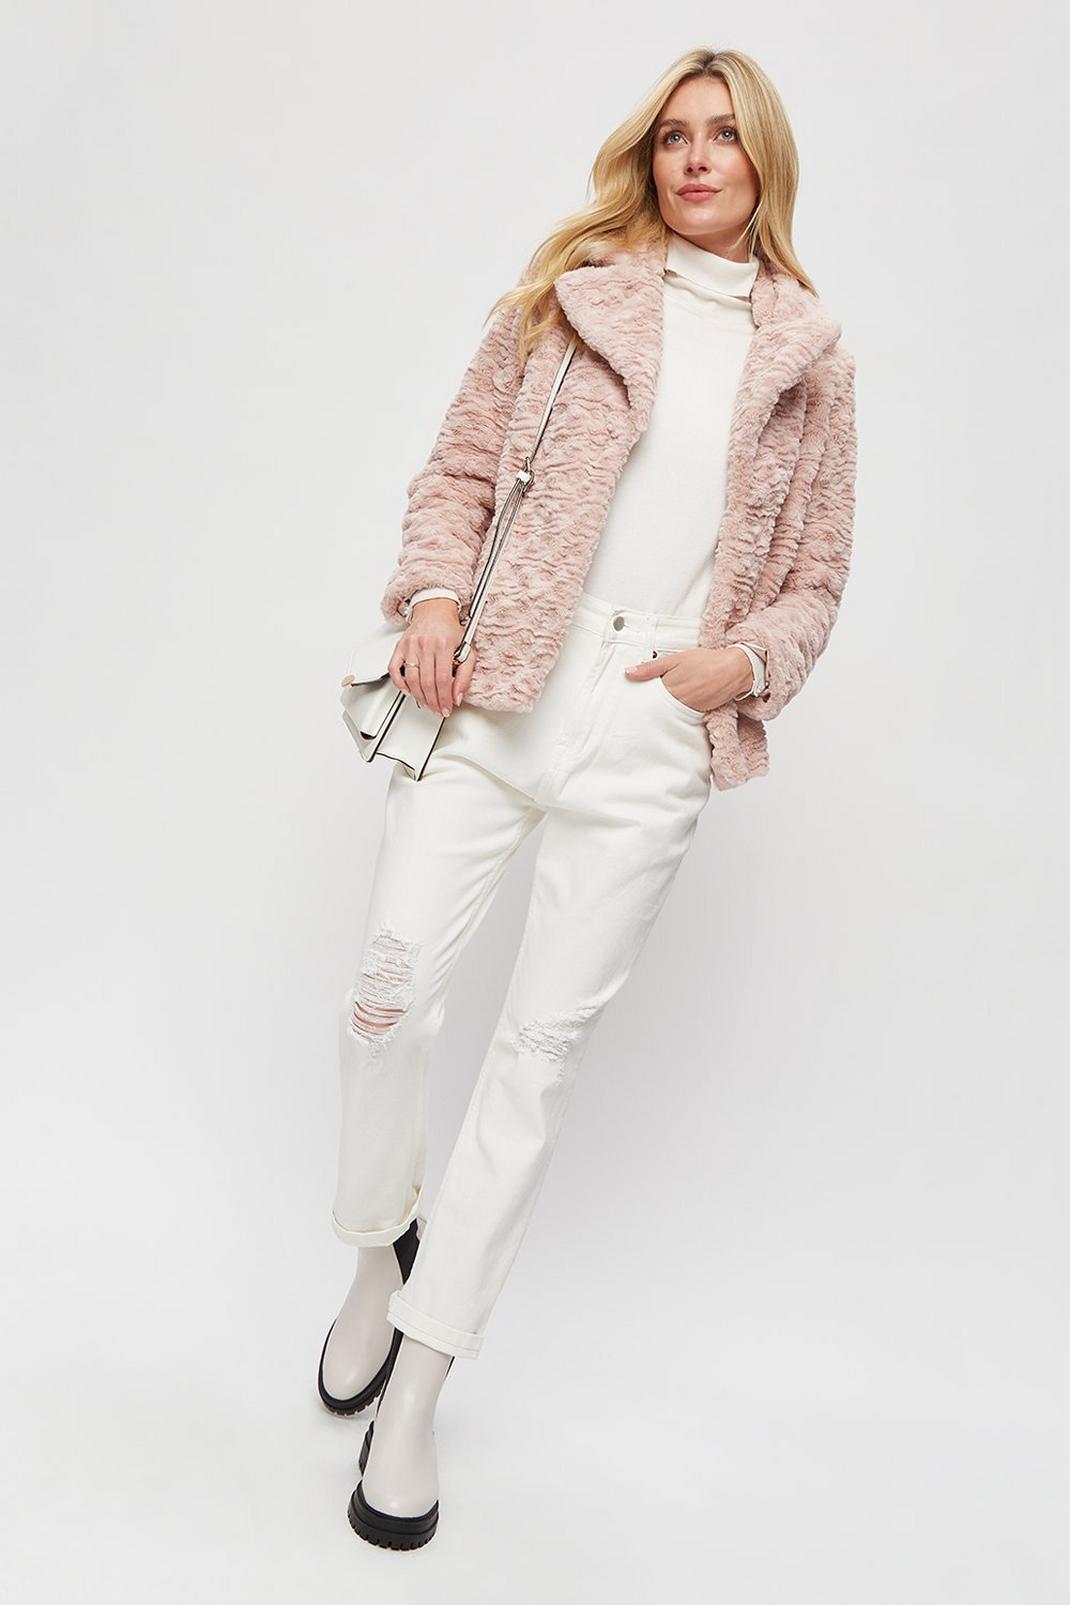 Blush Collar And Revere Short Textured Ripple Faux Fur Coat image number 1